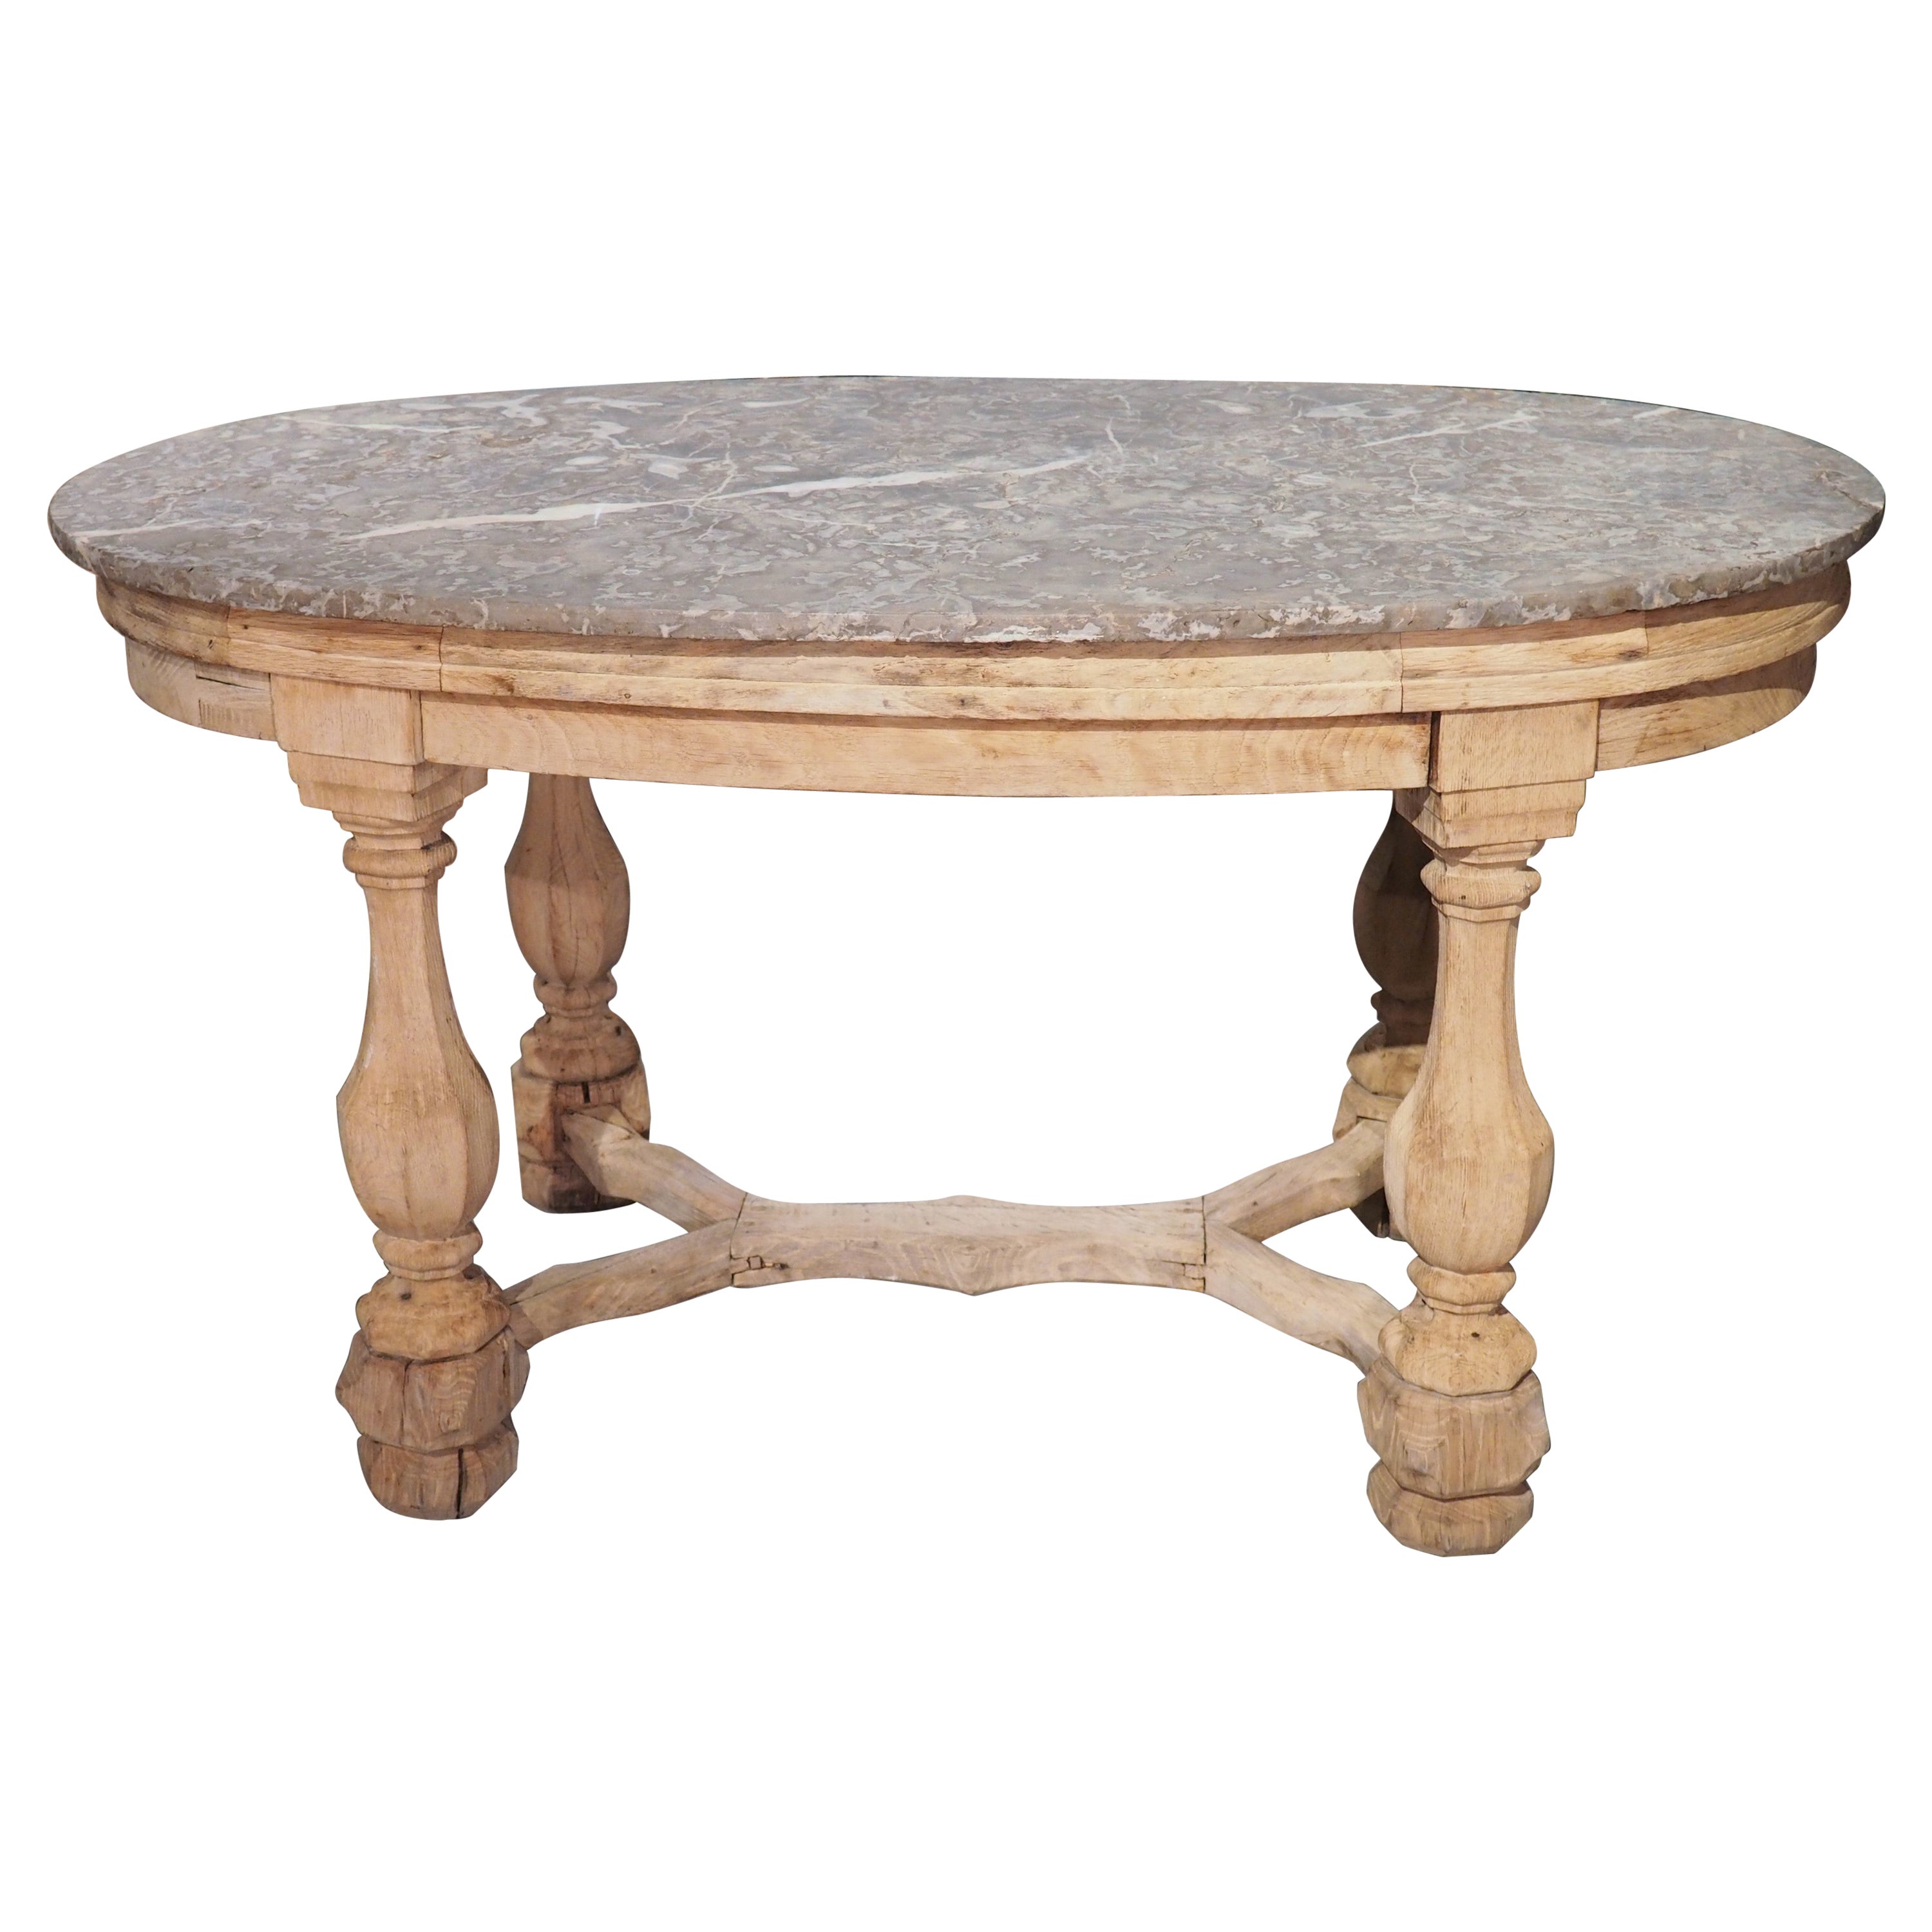 French Bleached Oak Center Table with Marble Top, Circa 1860